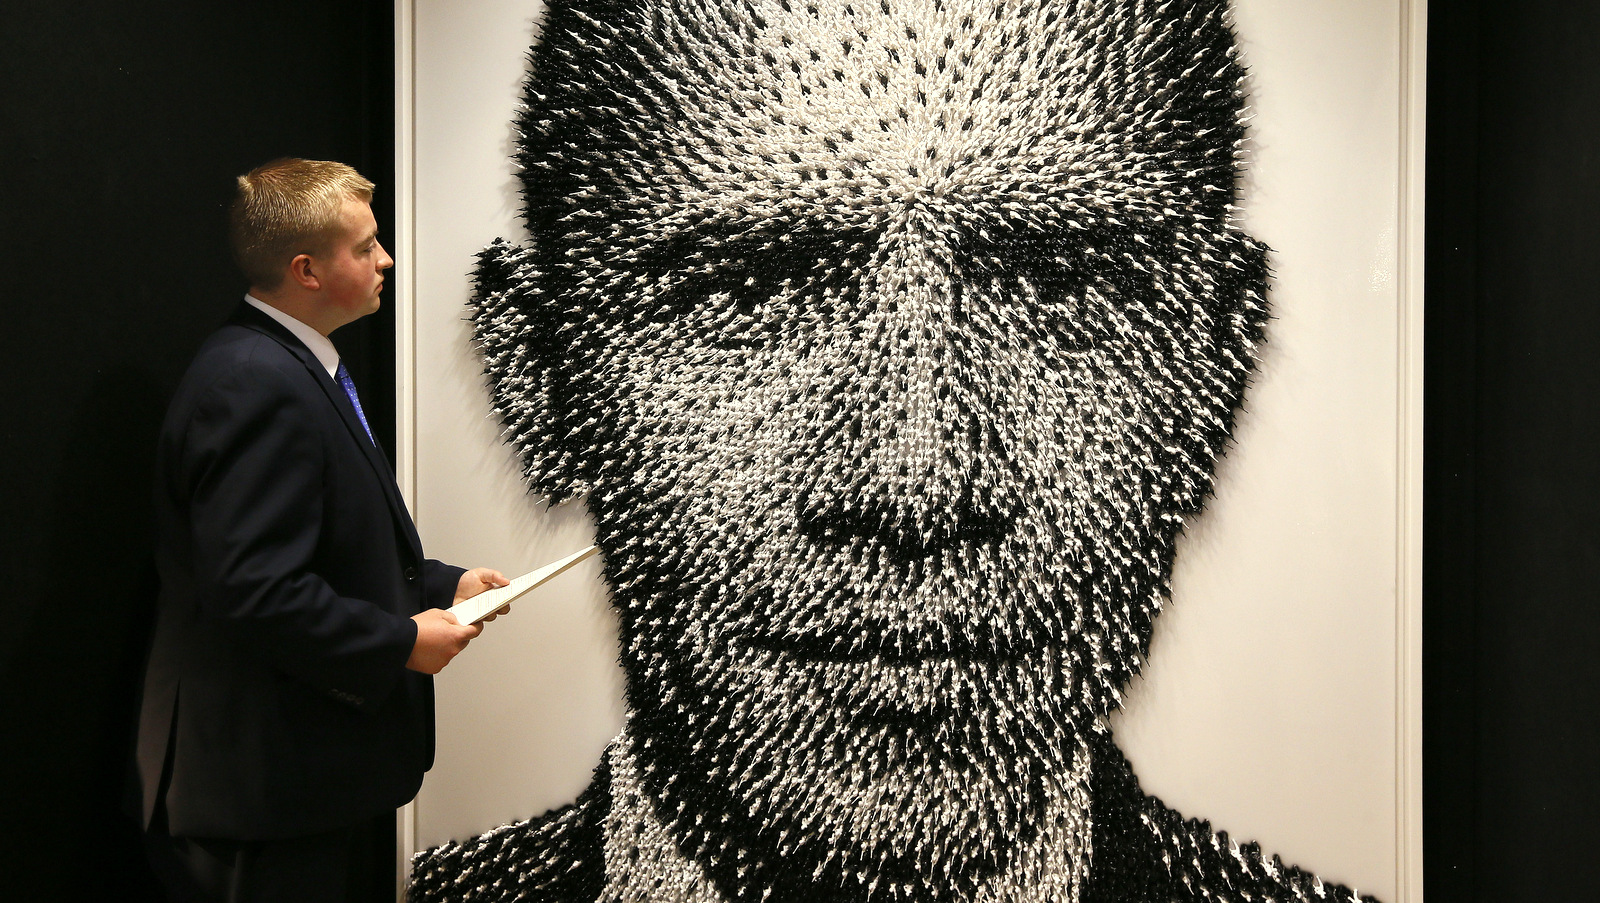 A Christie's employee looks at a portrait of Barack Obama by artist Joe Black called 'Shoot to Kill' made from thousands of plastic toy soldiers, during a press preview at Christie's auction rooms in London, Monday, Aug. 3, 2015. (AP Photo/Kirsty Wigglesworth)